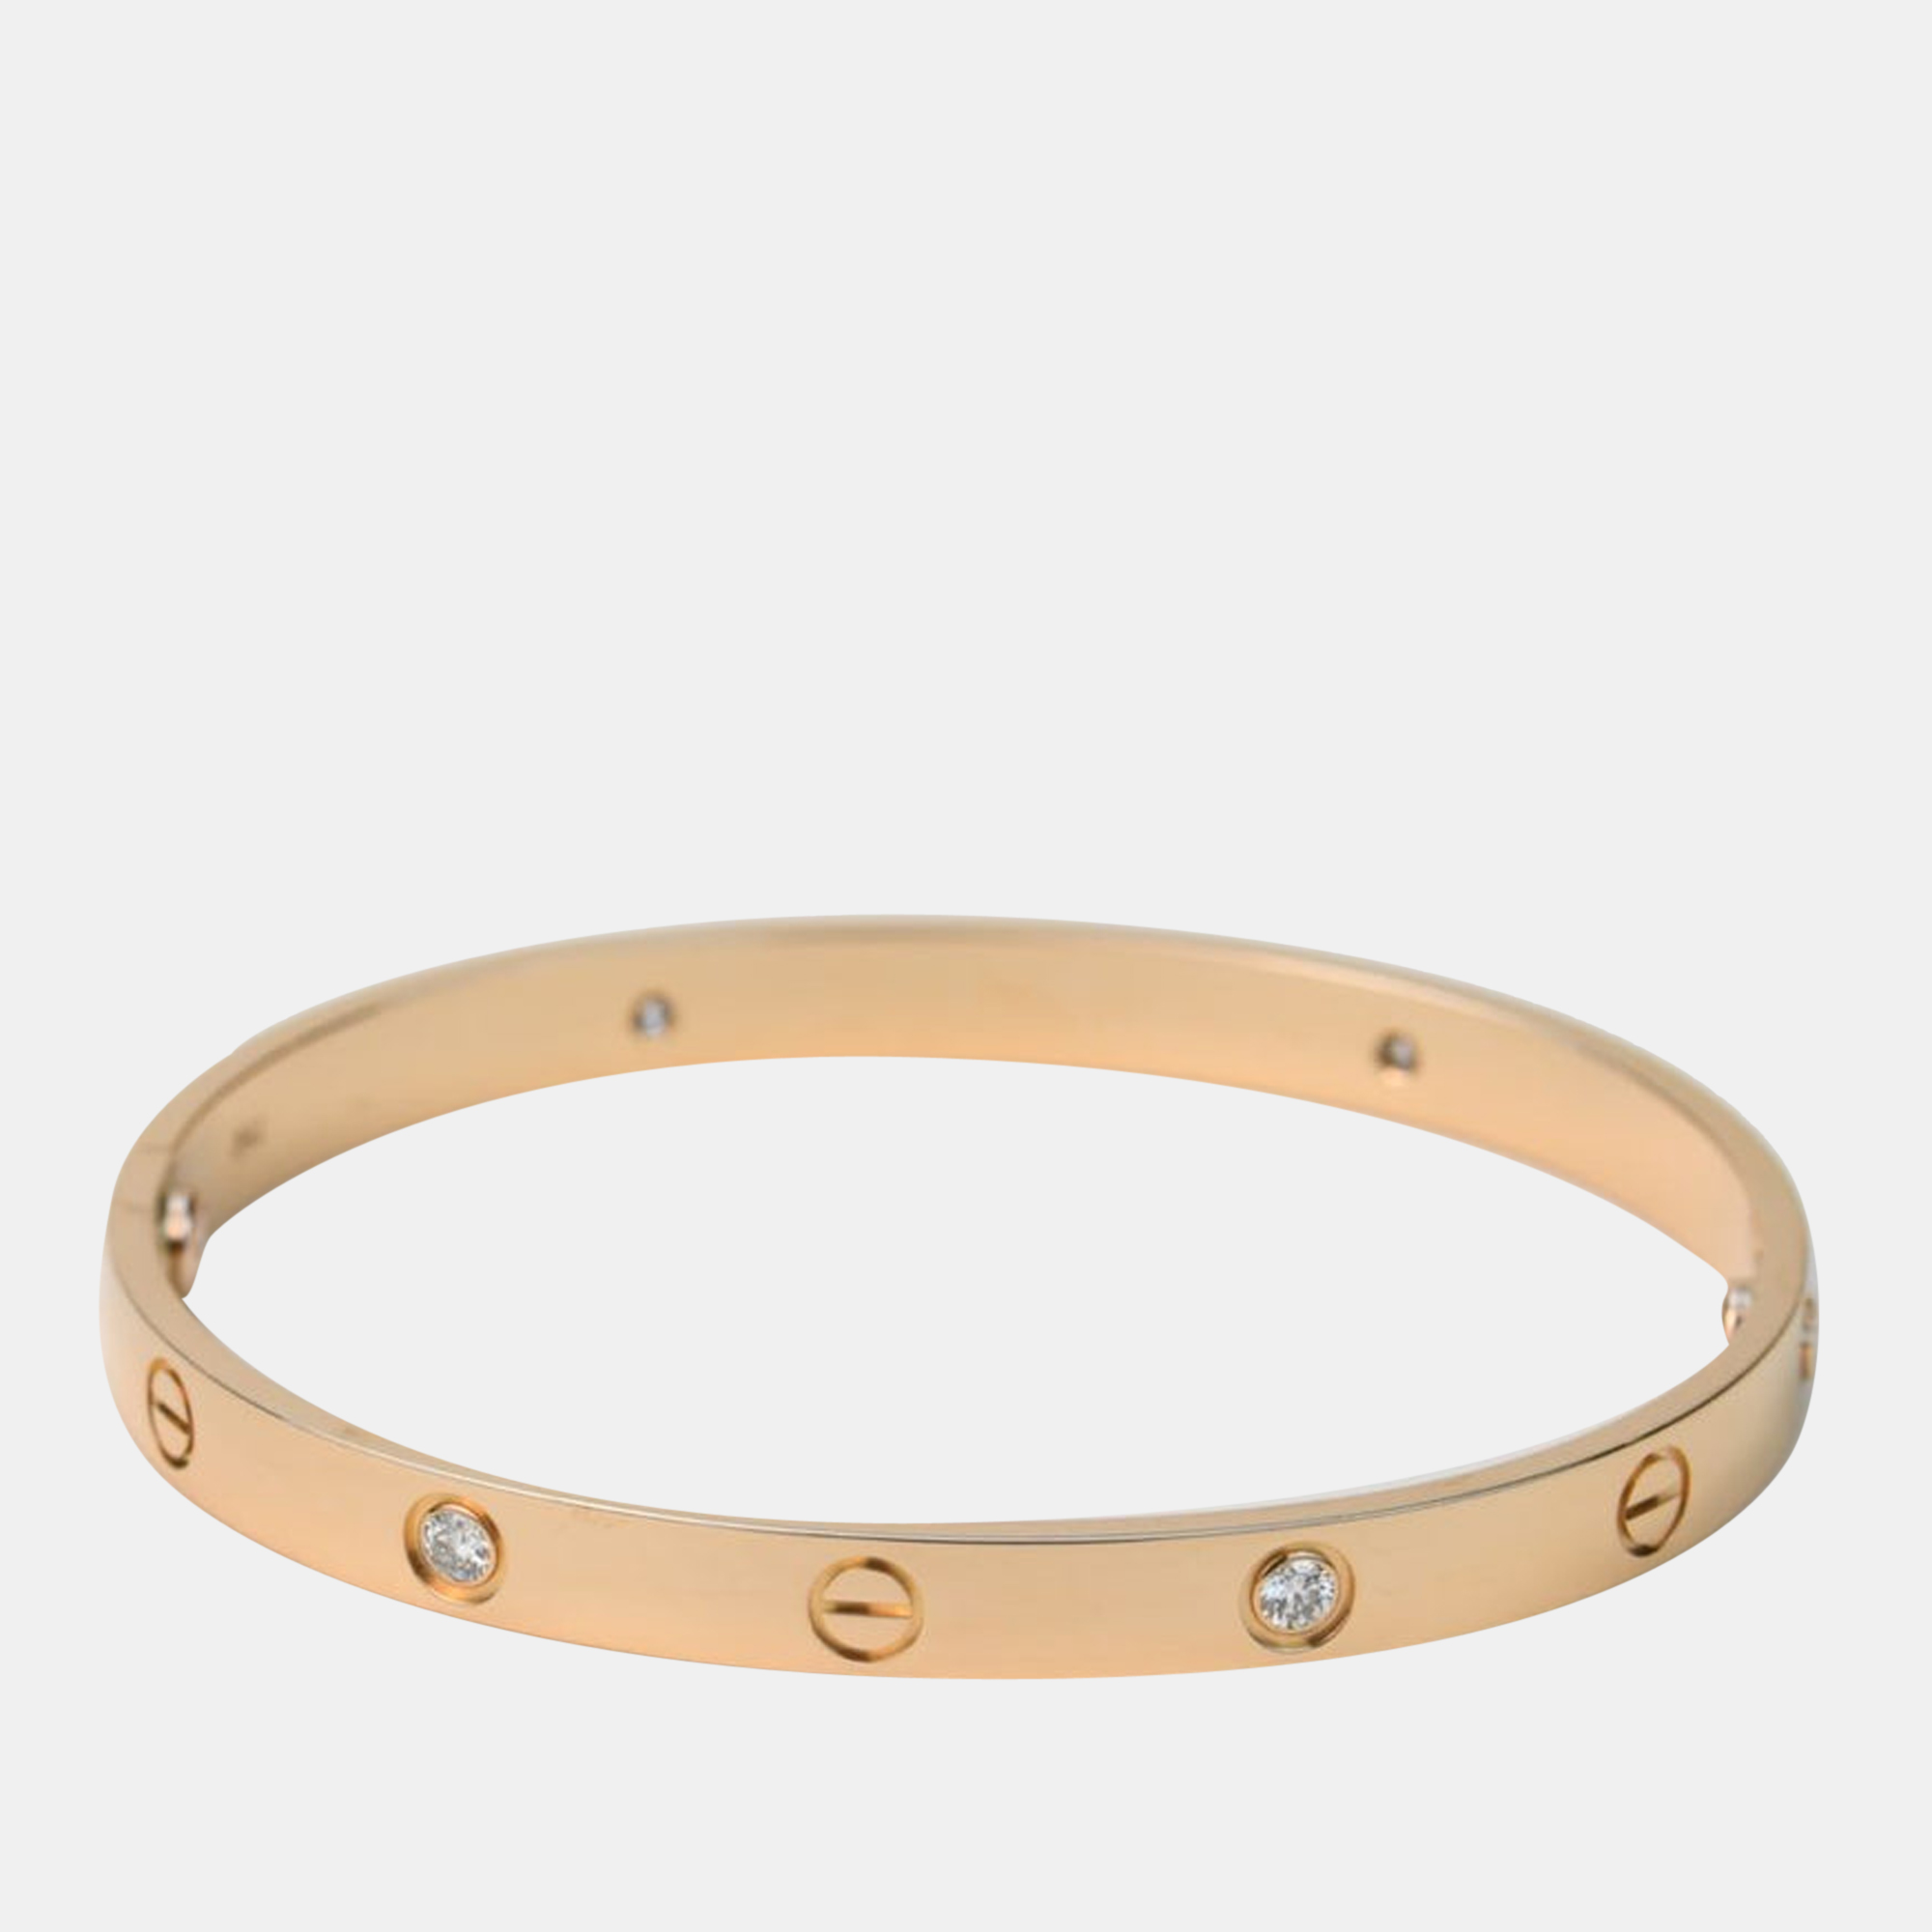 Cartiers Love bracelet is a modern symbol of luxury and a way to lock in ones love. Designed in an oval shape to comfortably sit around your wrist this iconic love handcuff is laid with distinct screw motifs and diamonds.